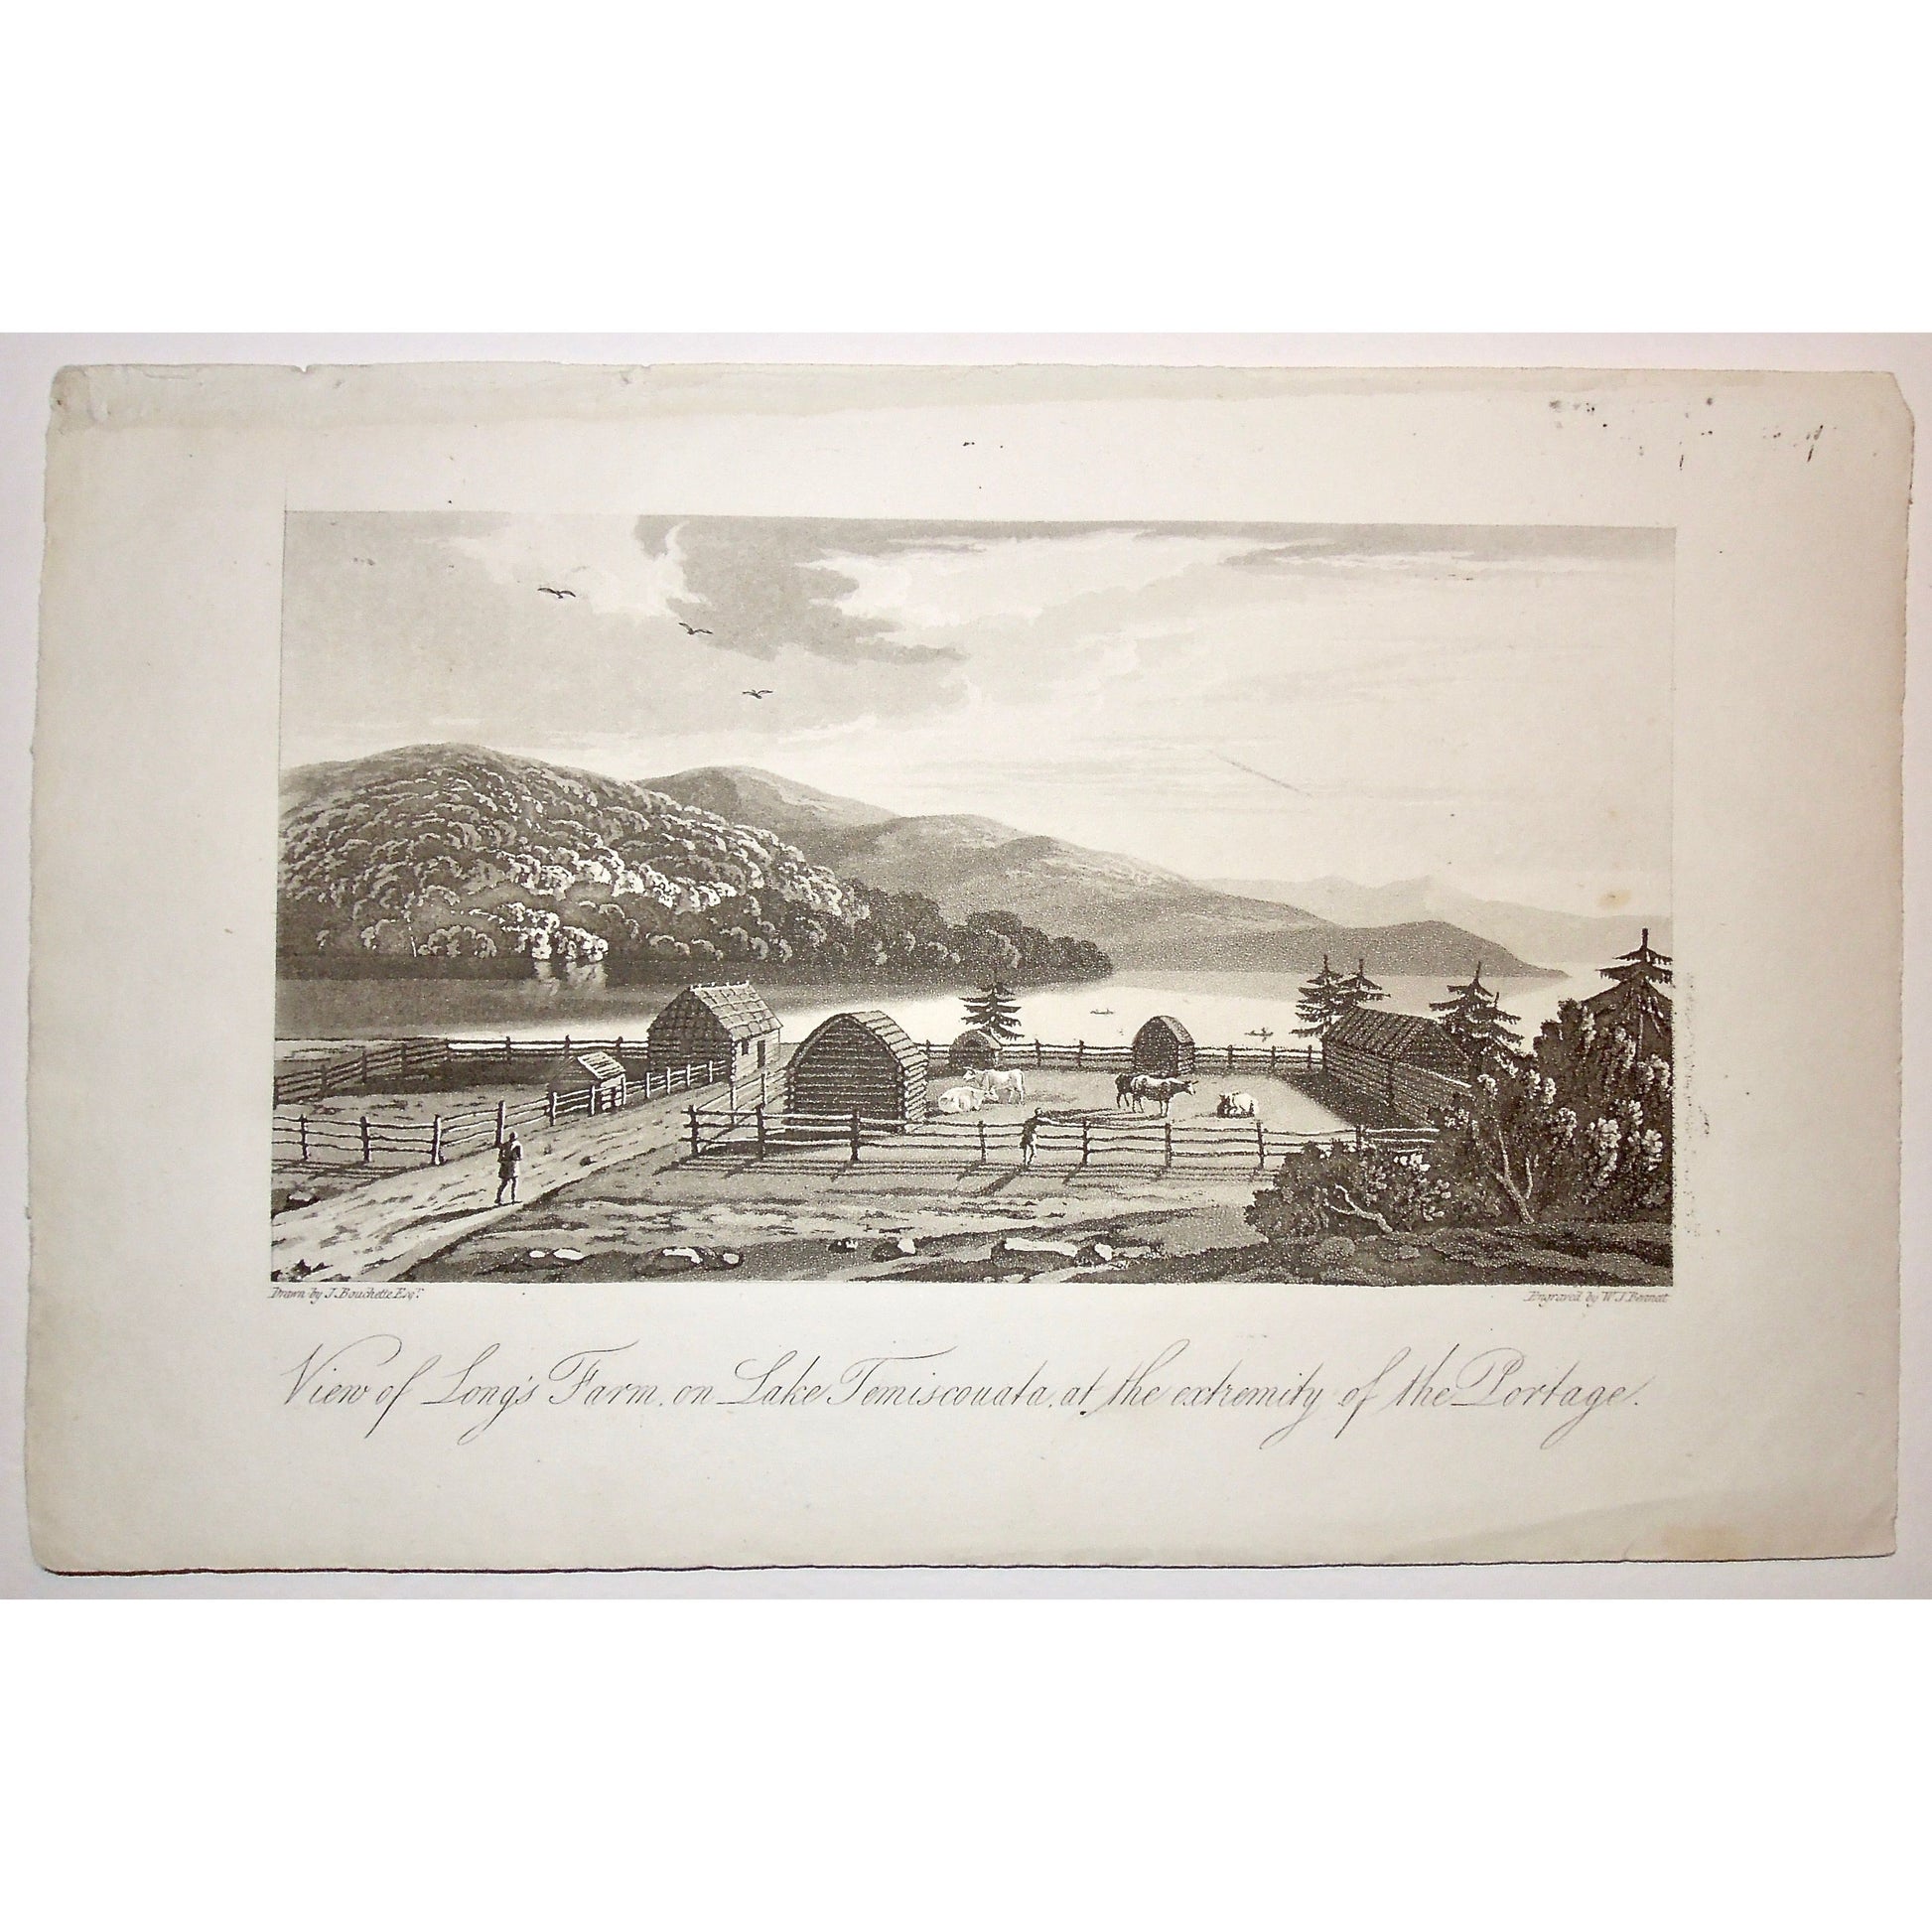 View of Long's Farm, View, Long's Farm, Farm, Lake, Temiscouata, Lac Temiscouata, Extremity, Portage, Cattle, Cows, Farming, Farmer, pen, cow pen, fencing, riverfront, A Topographical Description of the Province of Lower Canada, Lower Canada, Joseph Bouchette, Bouchette, 1815, W. Faden, Faden, W. J. Bennett, Bennett, Charing Cross, London, steel engraving, black and white, Antique, Prints, Decor, For Sale, Original, Vintage, Collector, Engraving, Steel Engraving, Art, 